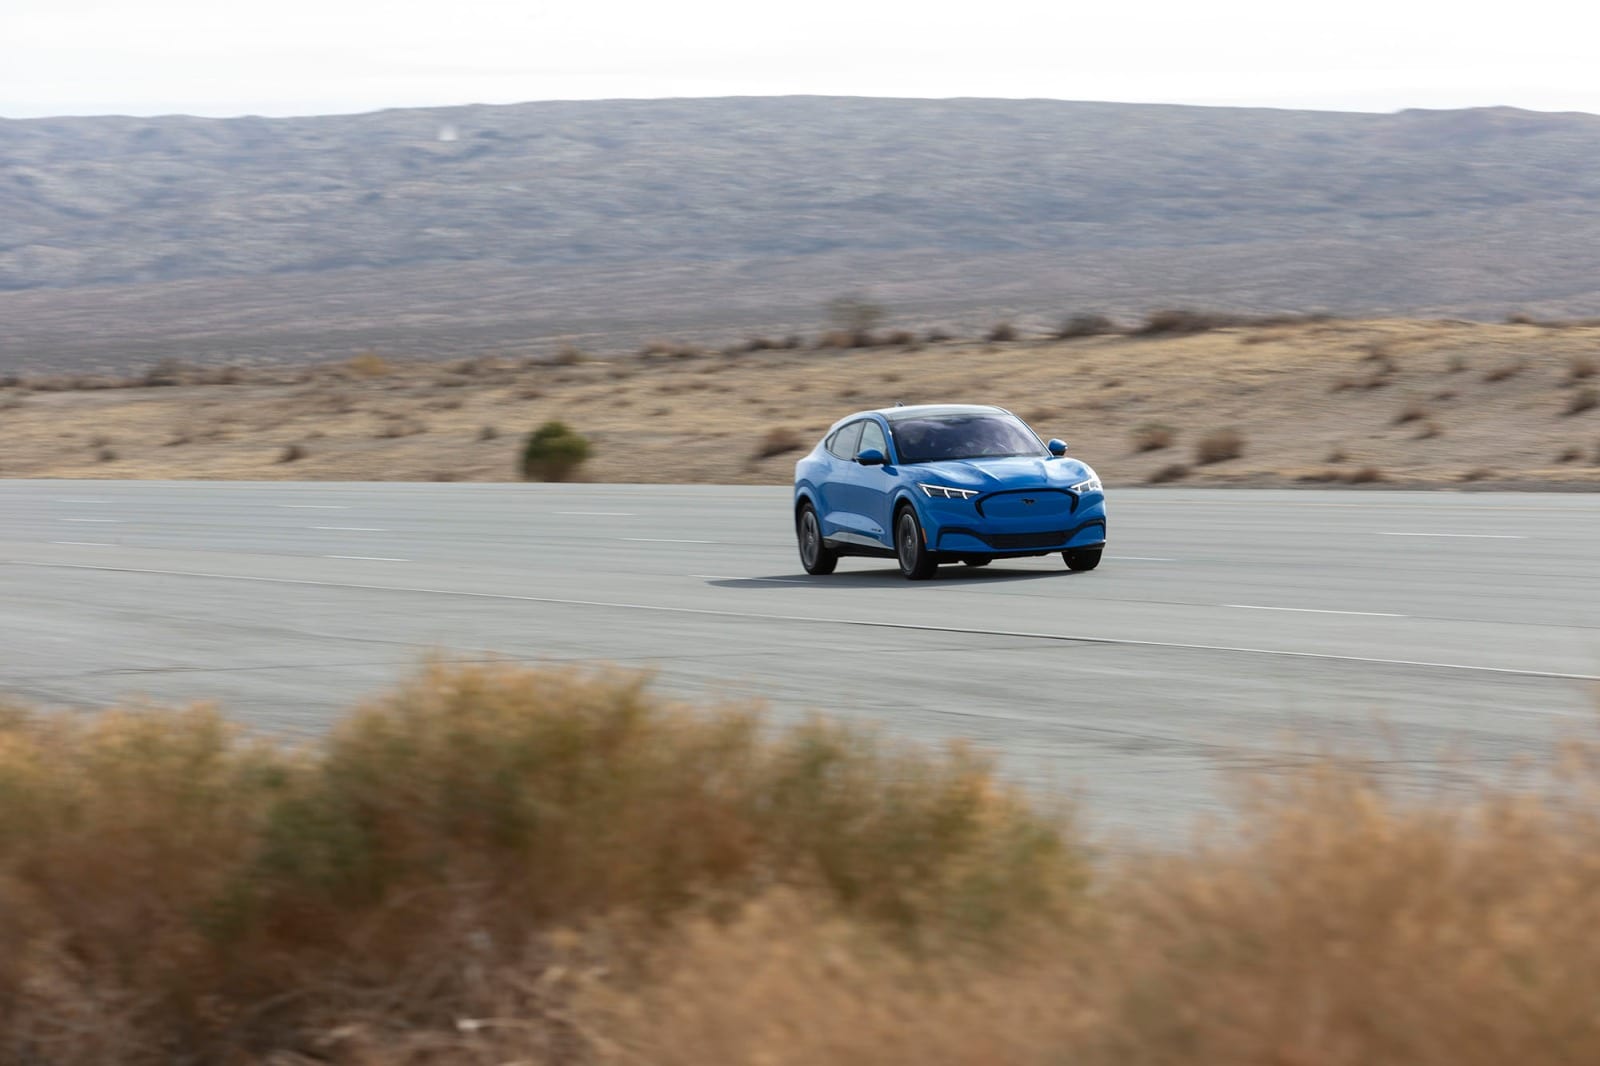 TESTED: 2021 Ford Mustang Mach-E California Route 1 Beats EPA Range by 39 Miles